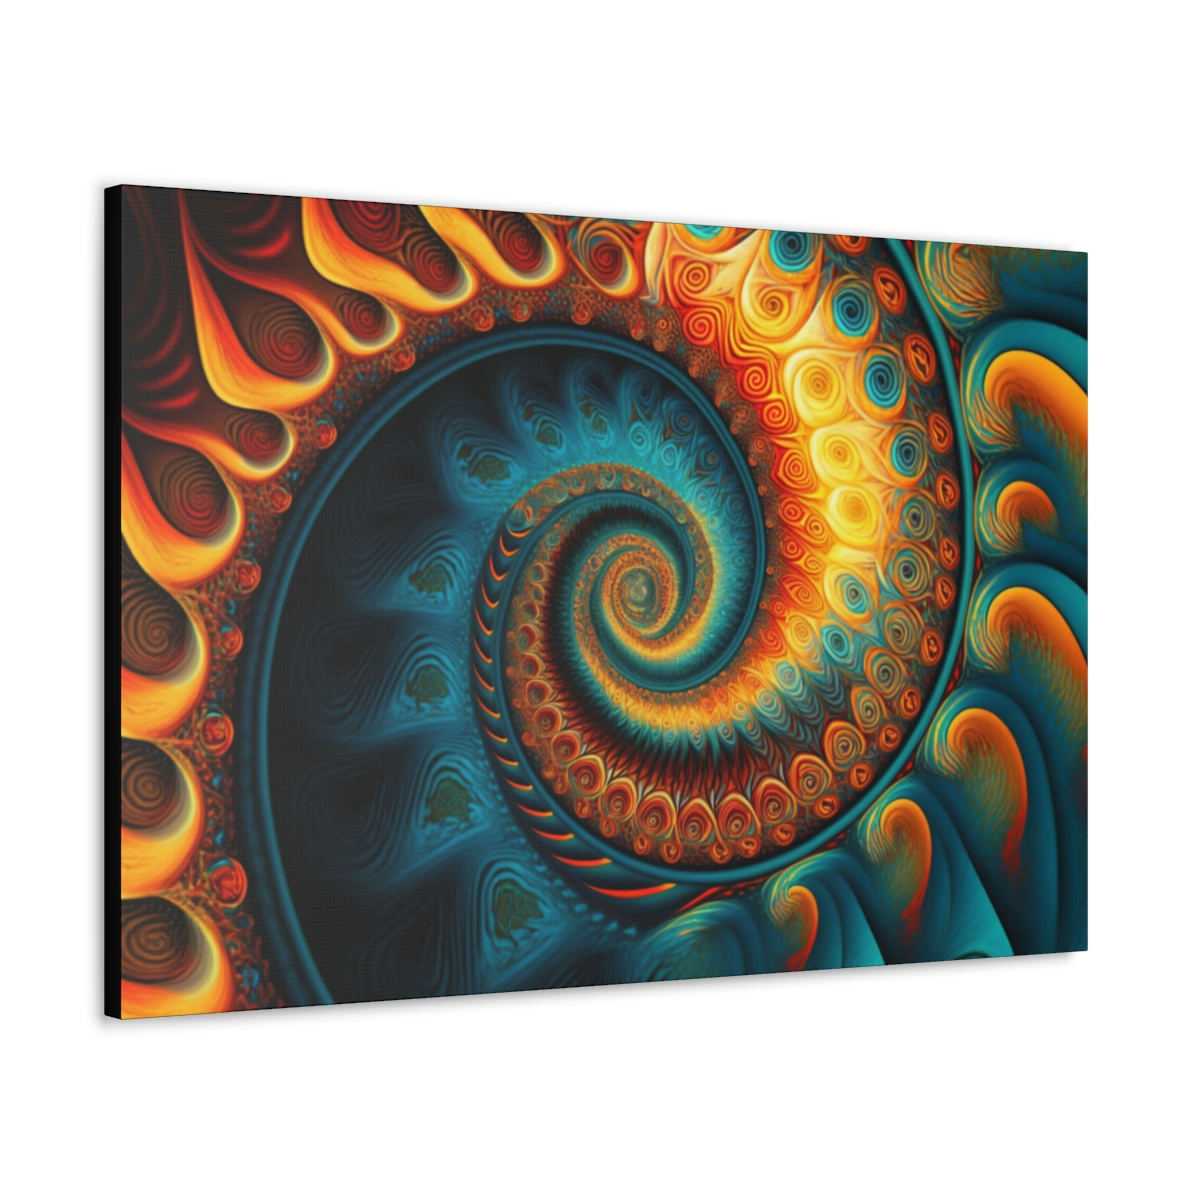 Trippy Art Canvas Print: Infinity Formulated